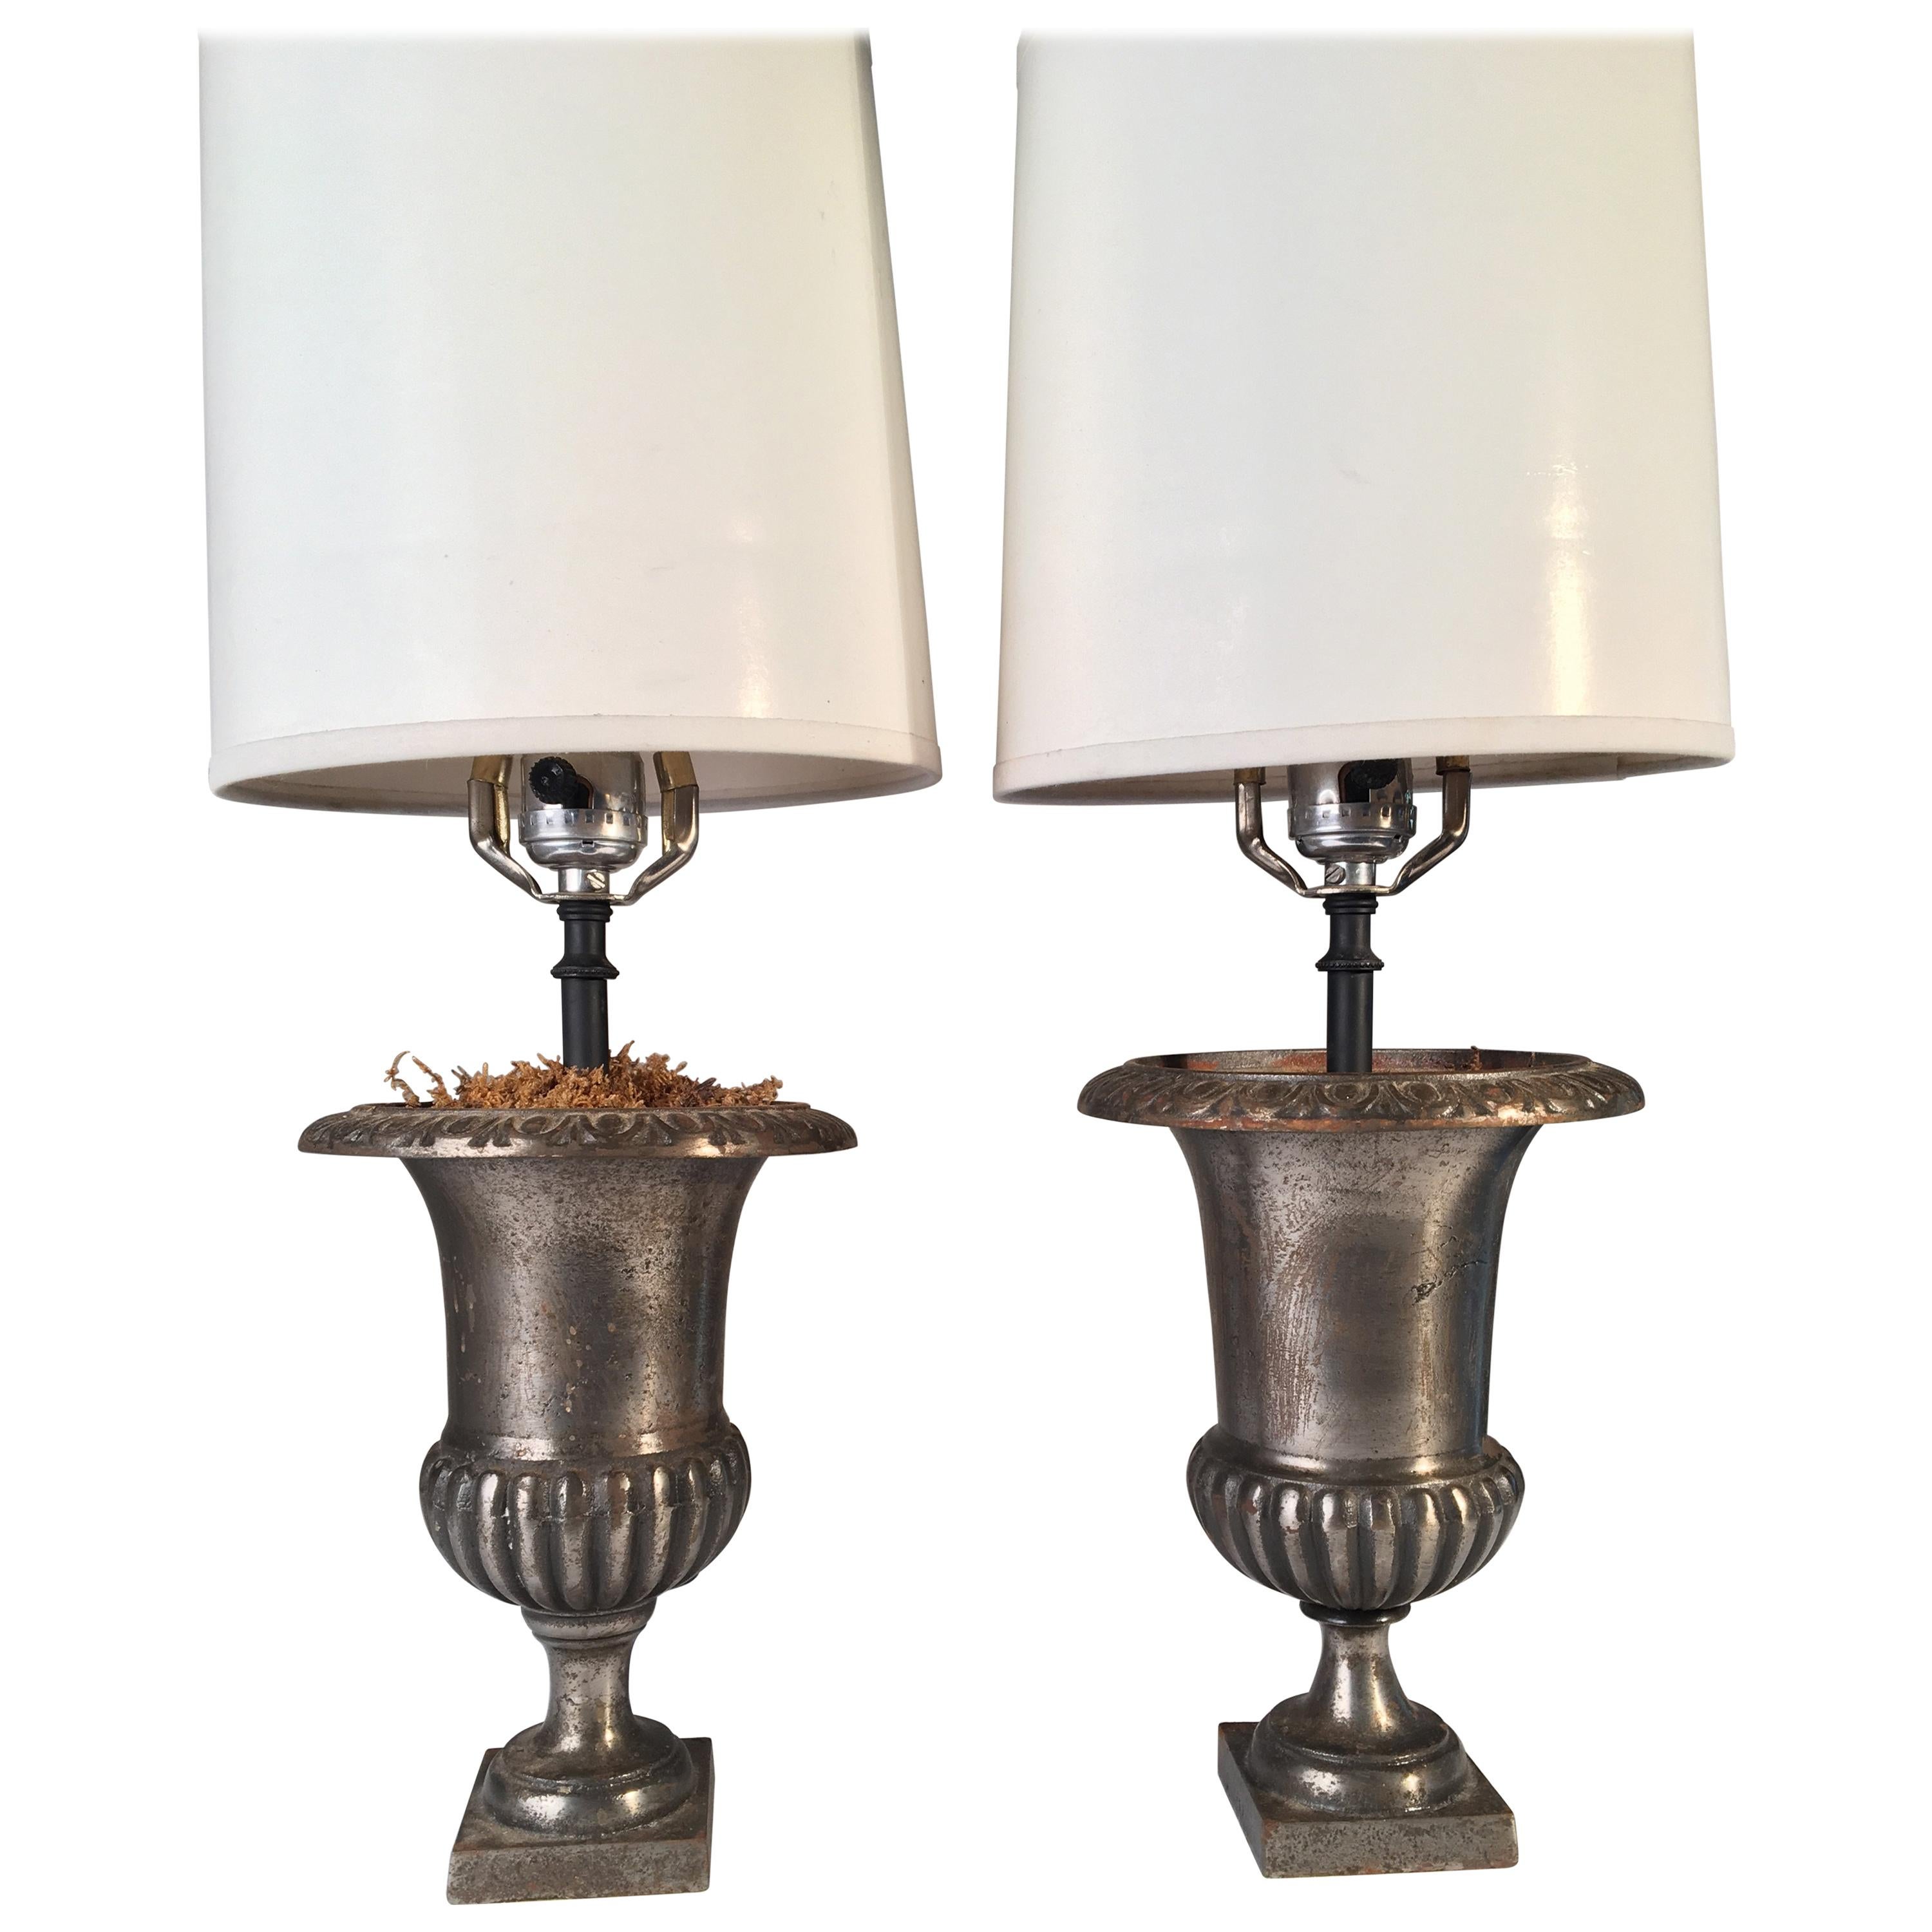 Pair of Polished Steel Urn Lamps